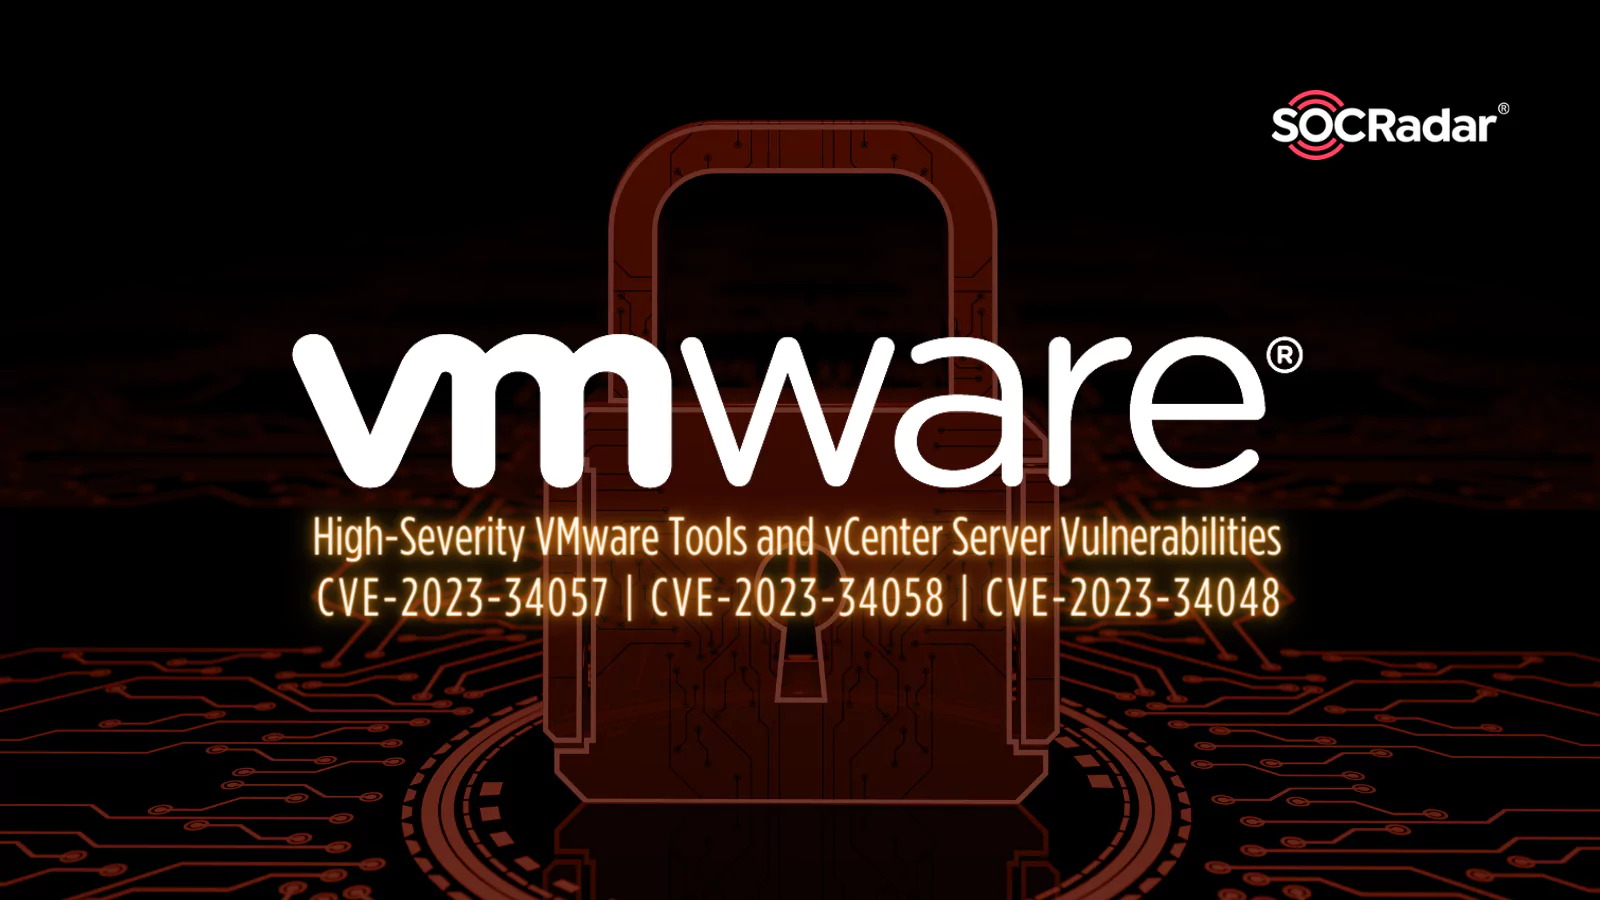 HighSeverity VMware Tools and vCenter Server Vulnerabilities Addressed